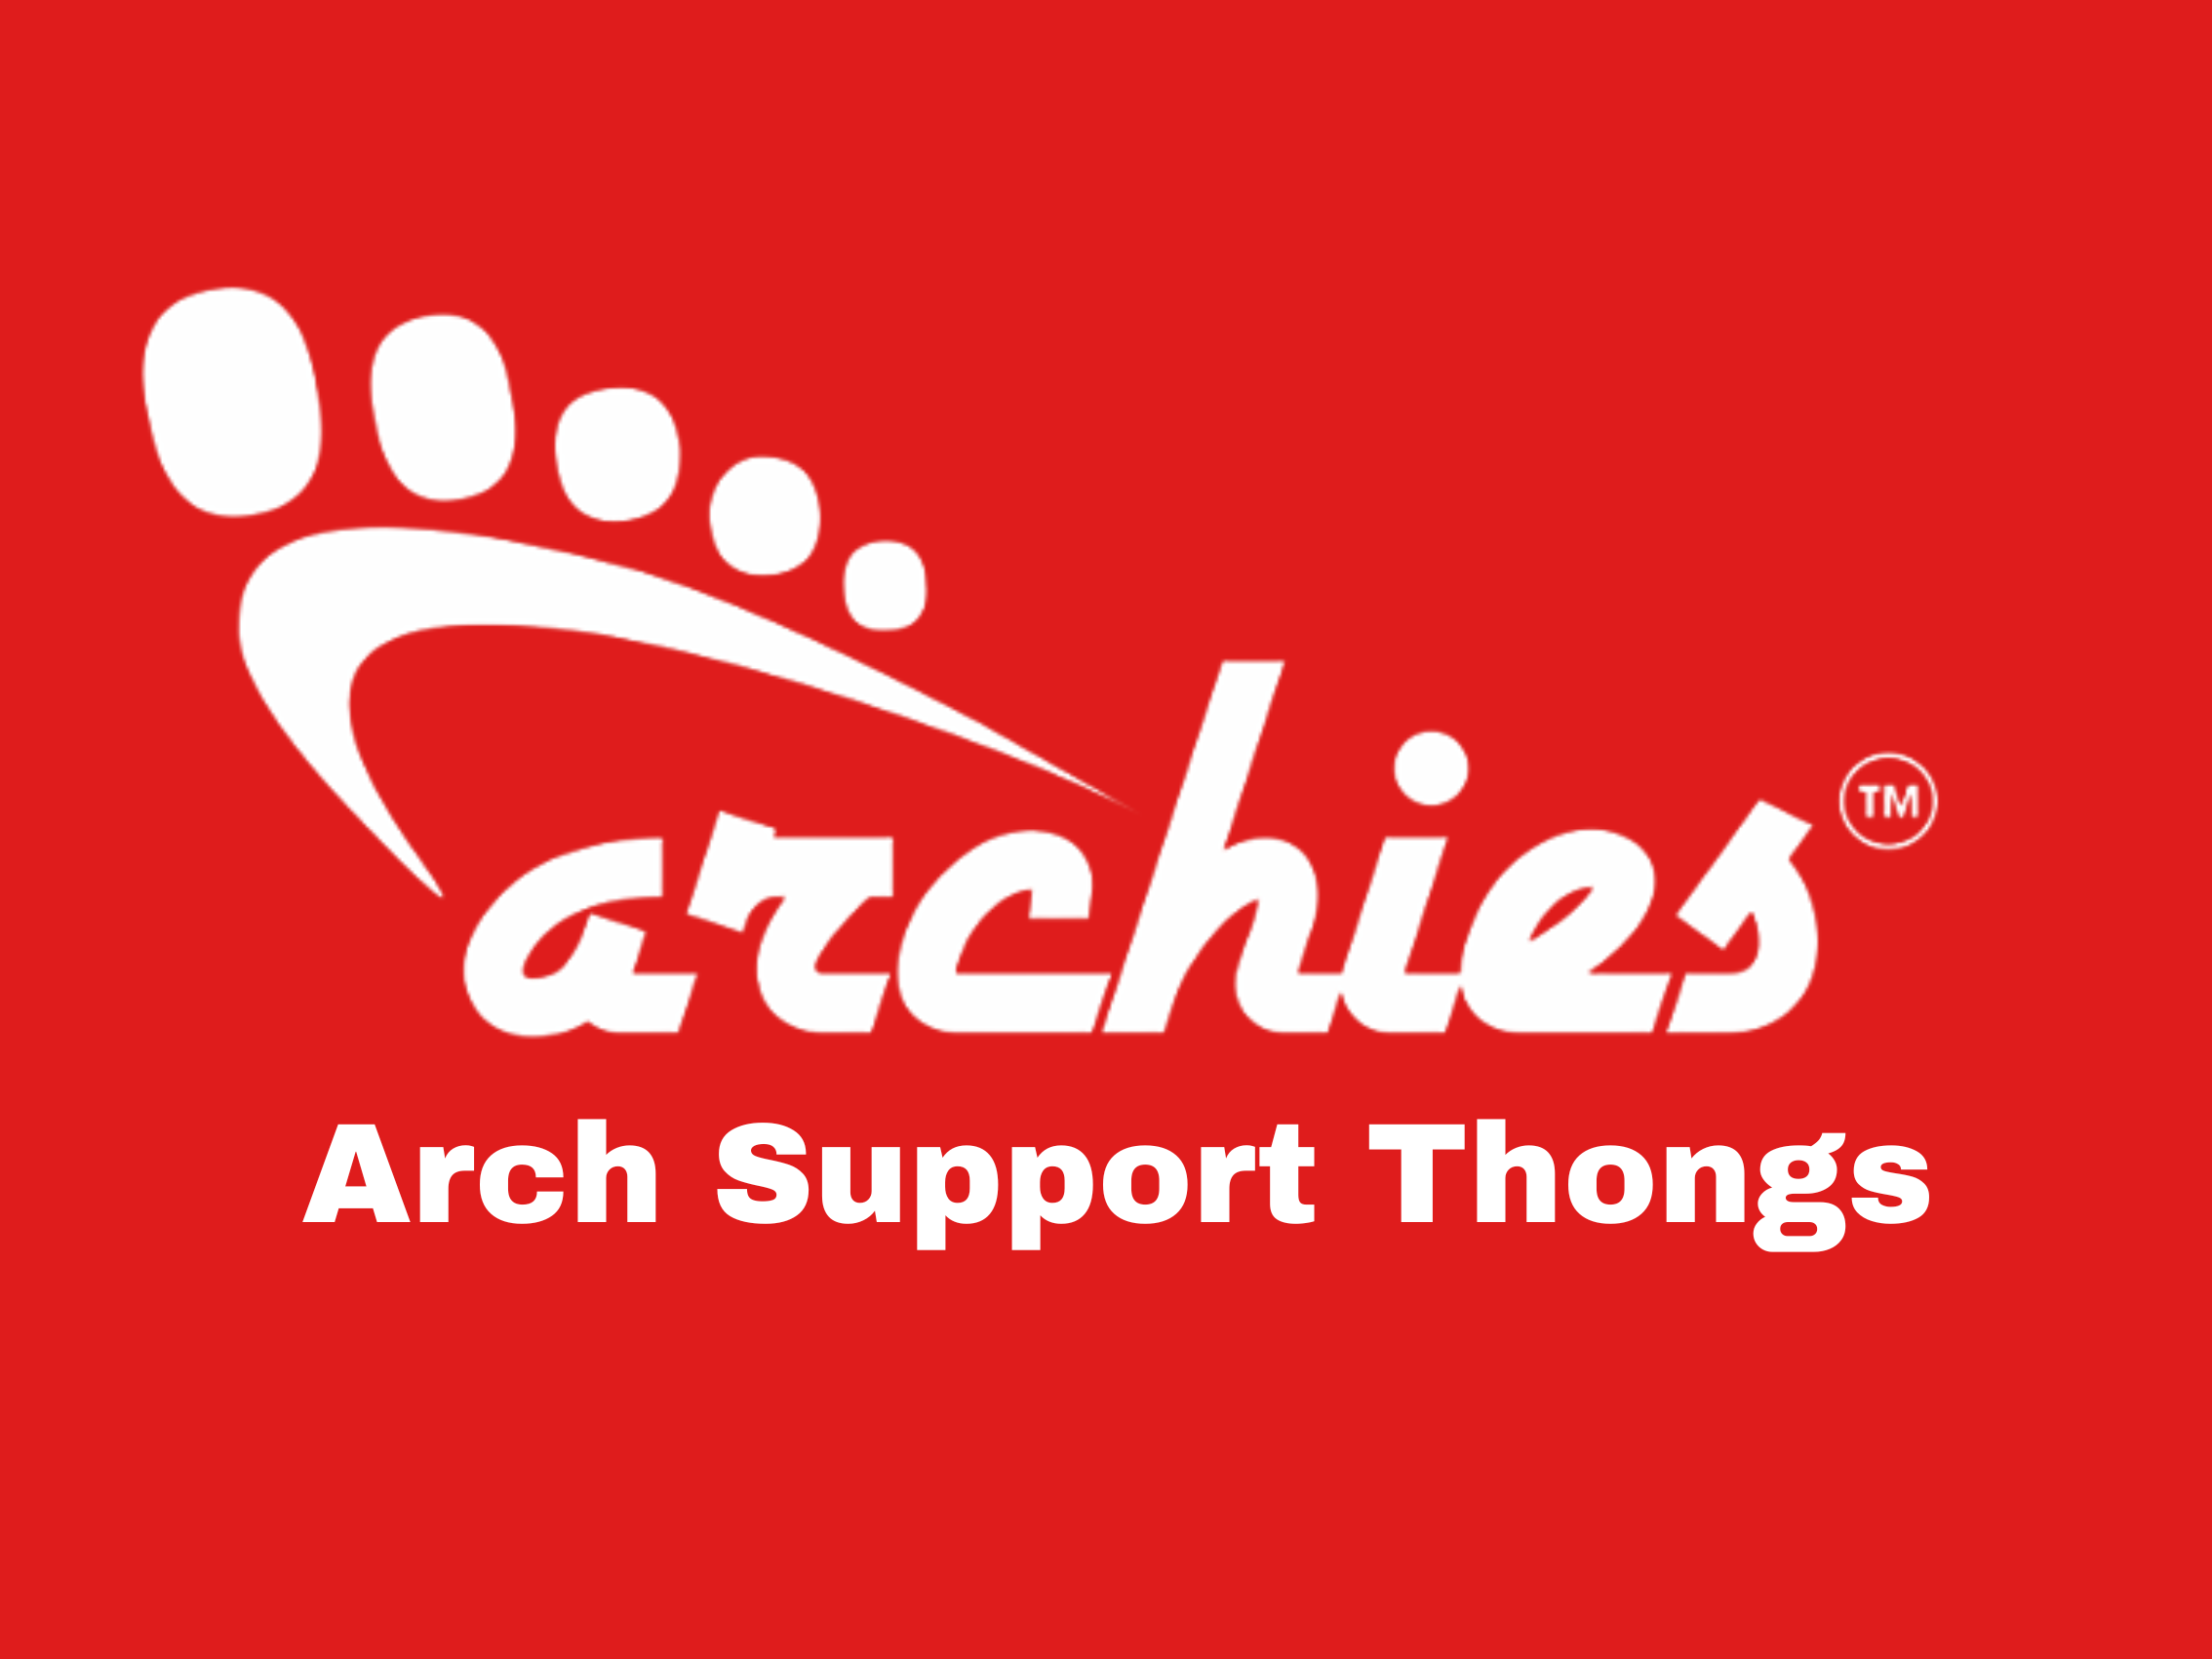 Archies Arch Support Thongs!